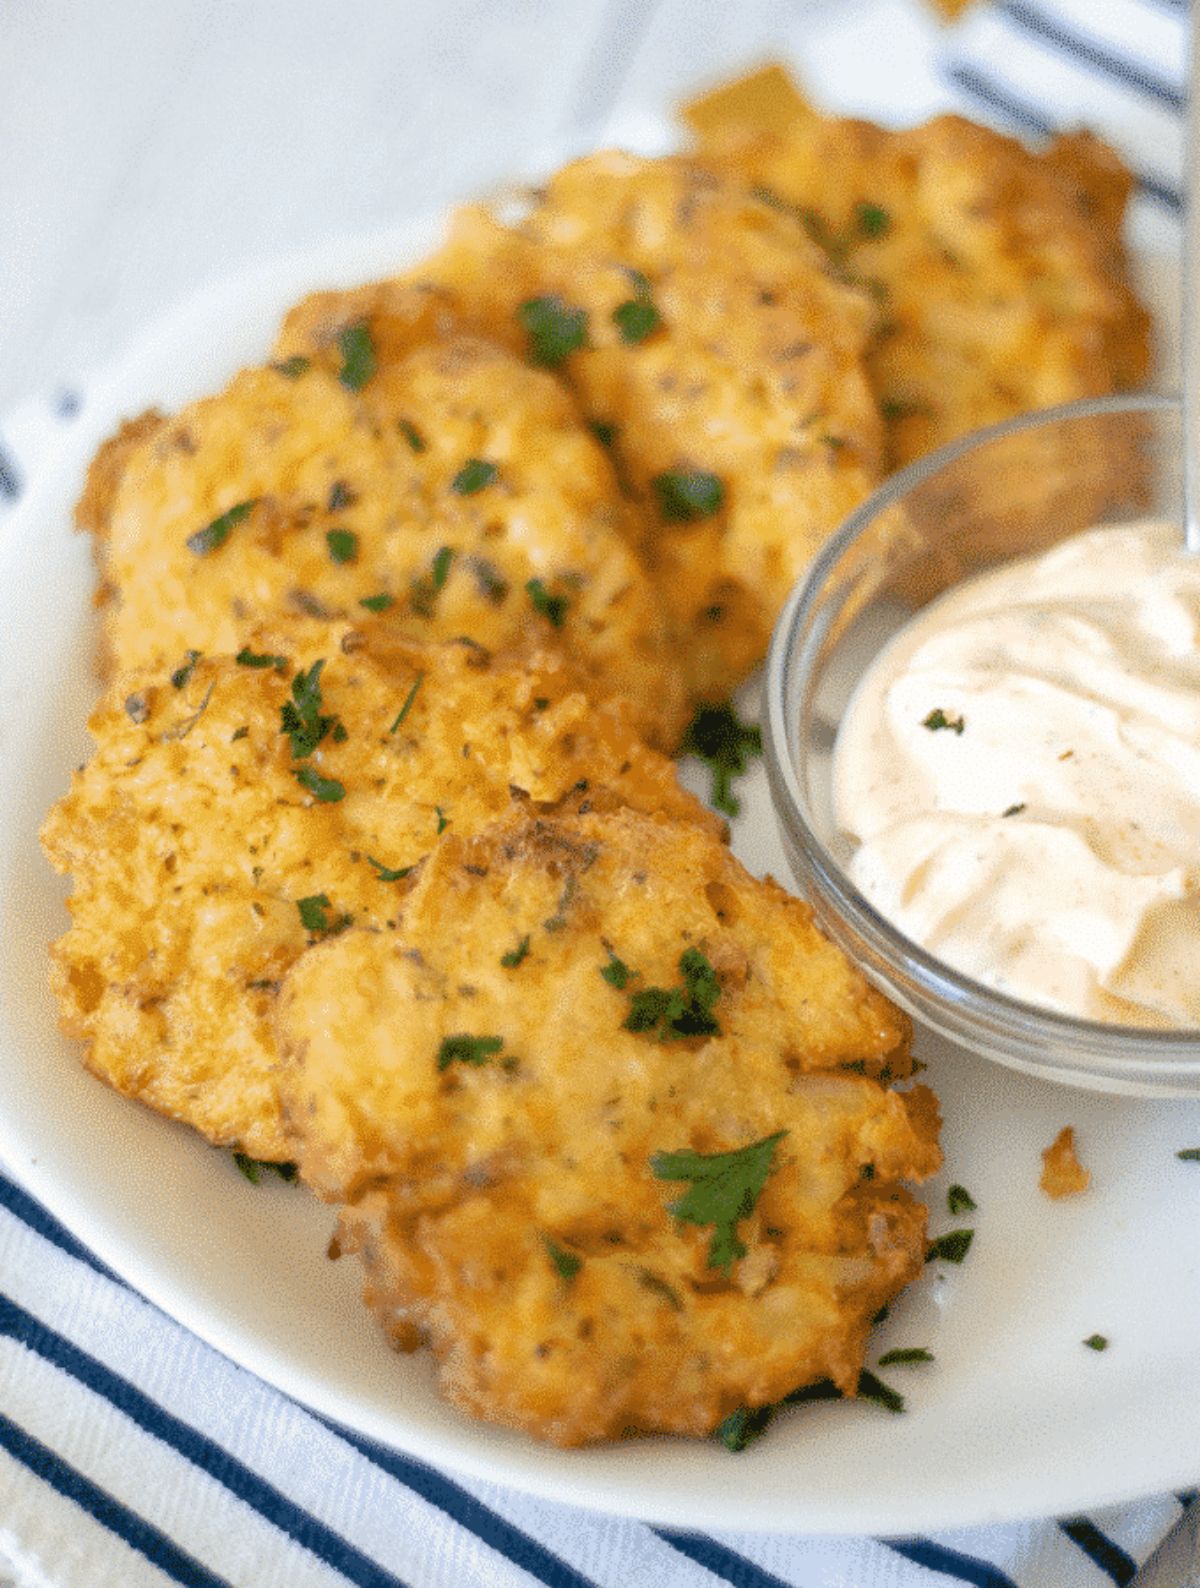 On a hwote plate are 5 small crab cakes, next to a glass bowl filled with white dip